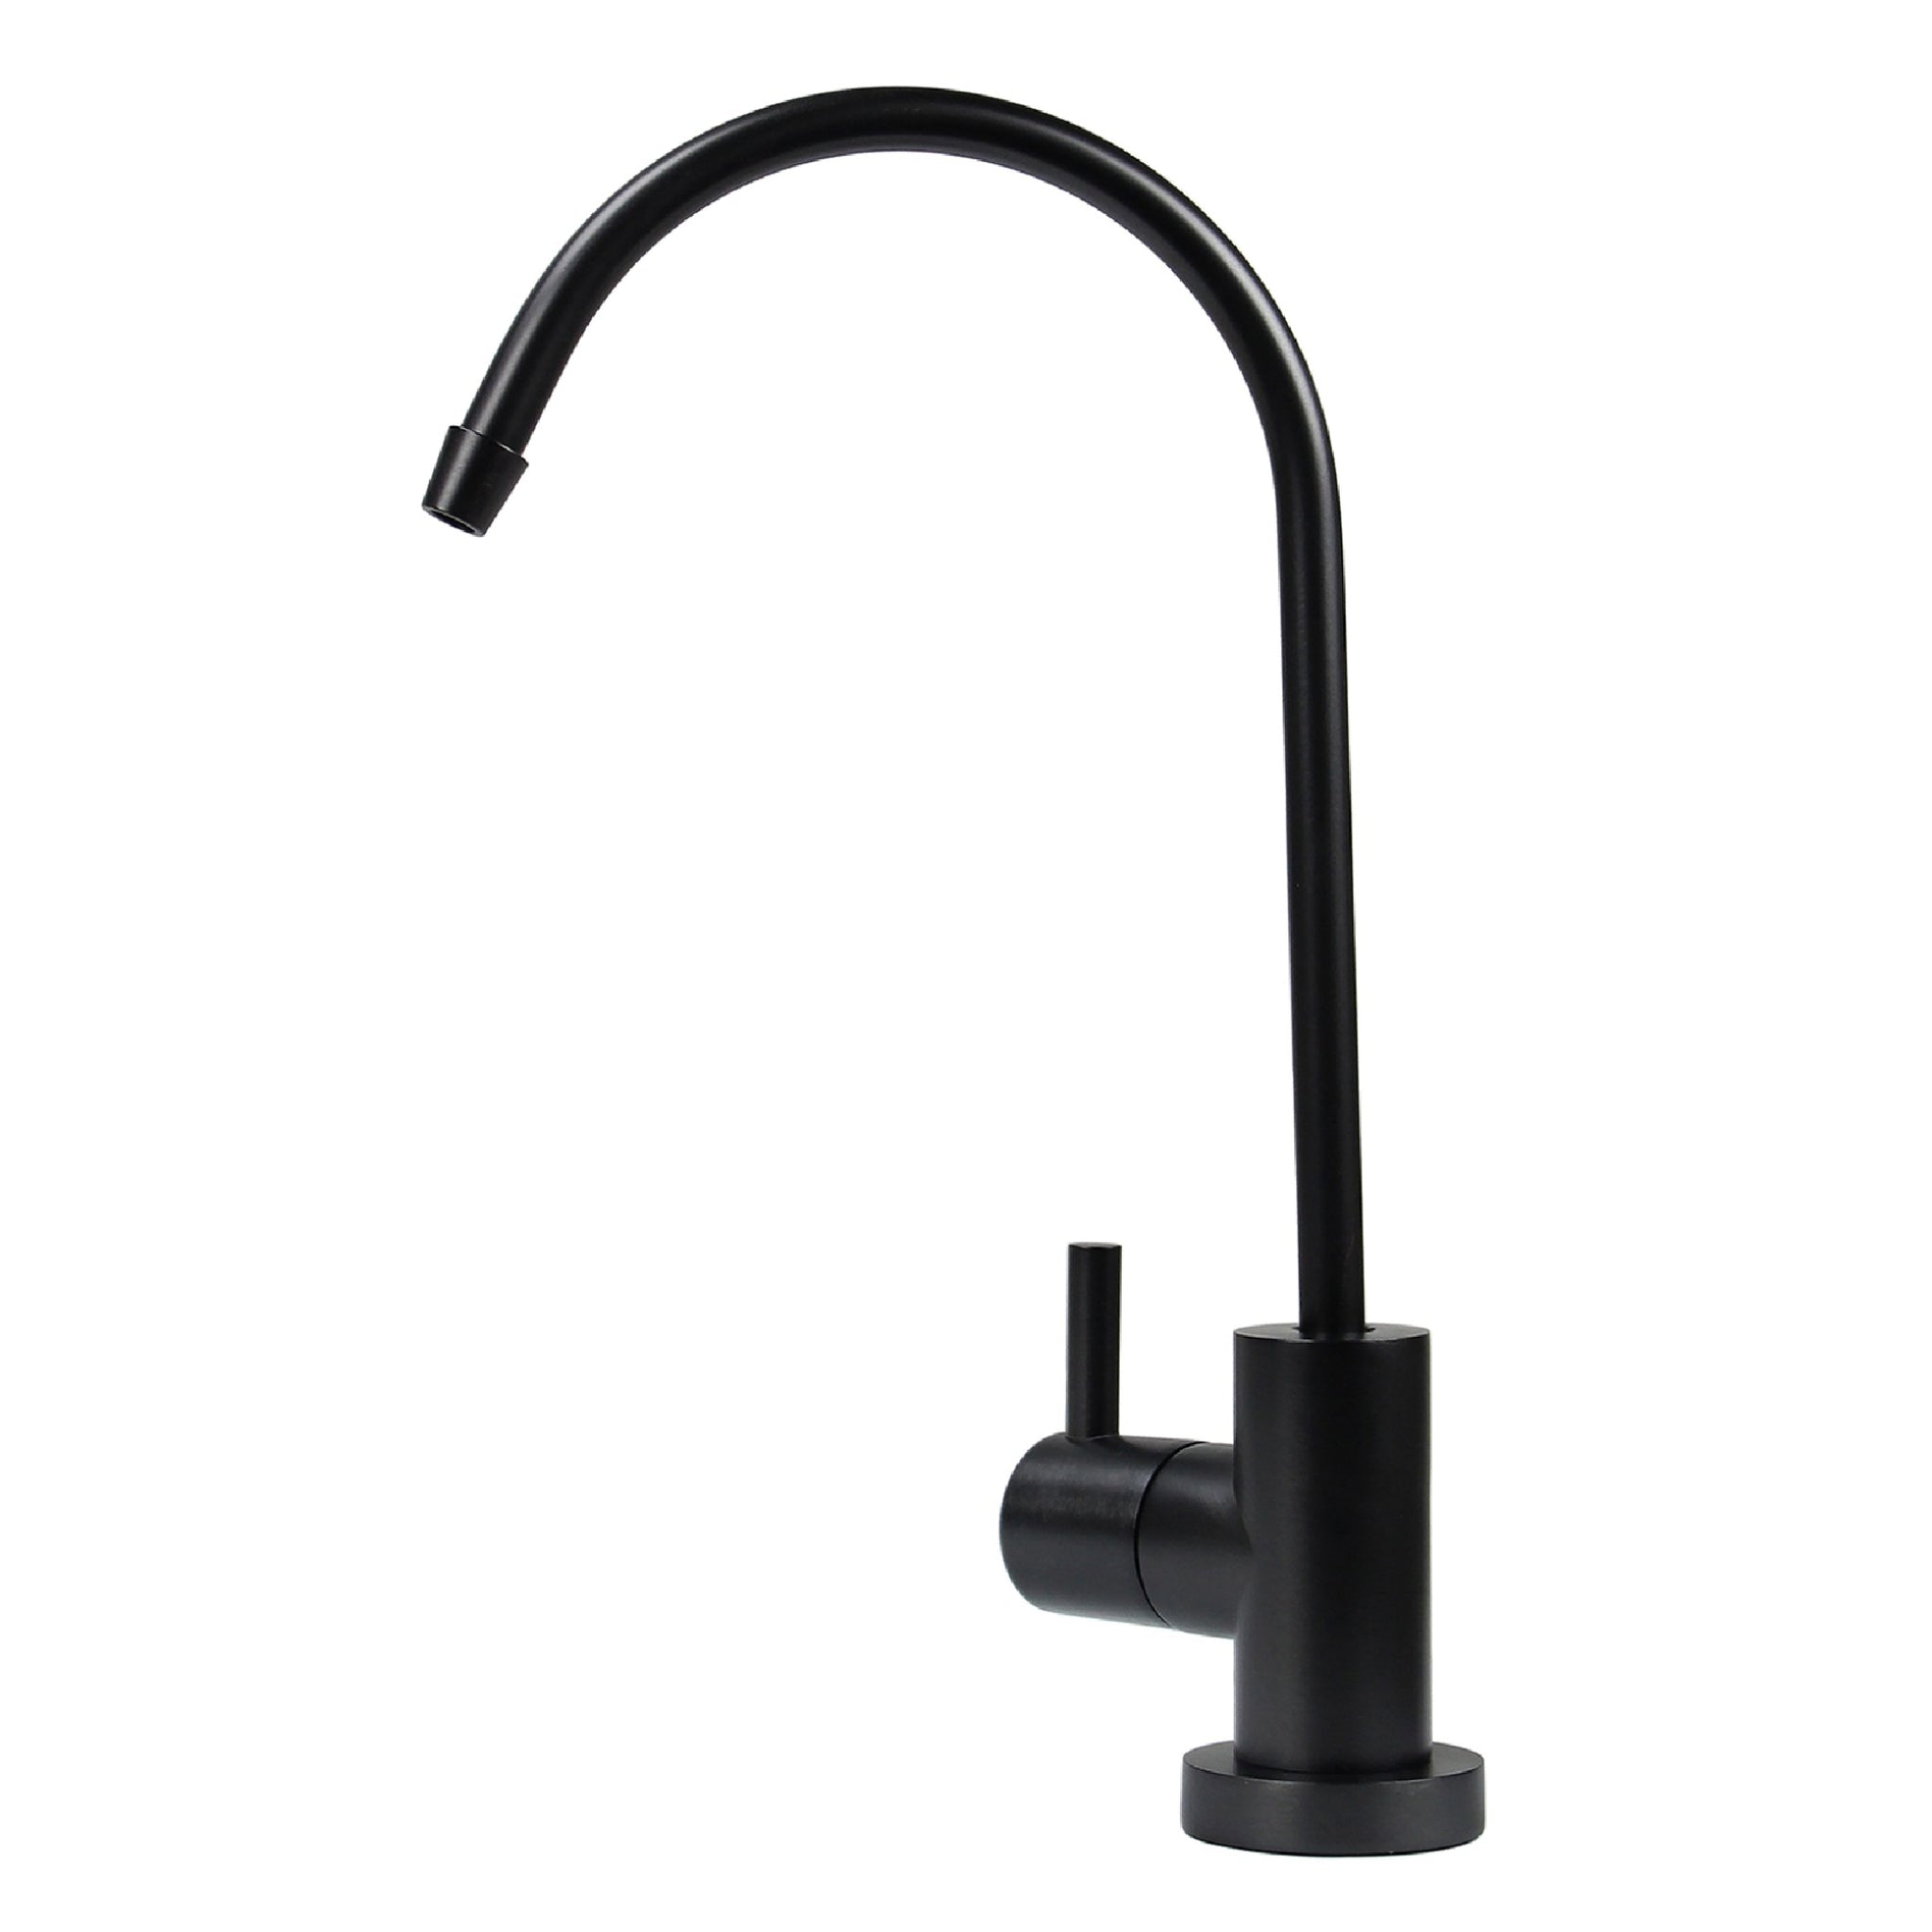 A metpure long reach ro water filtration wholesale faucet.